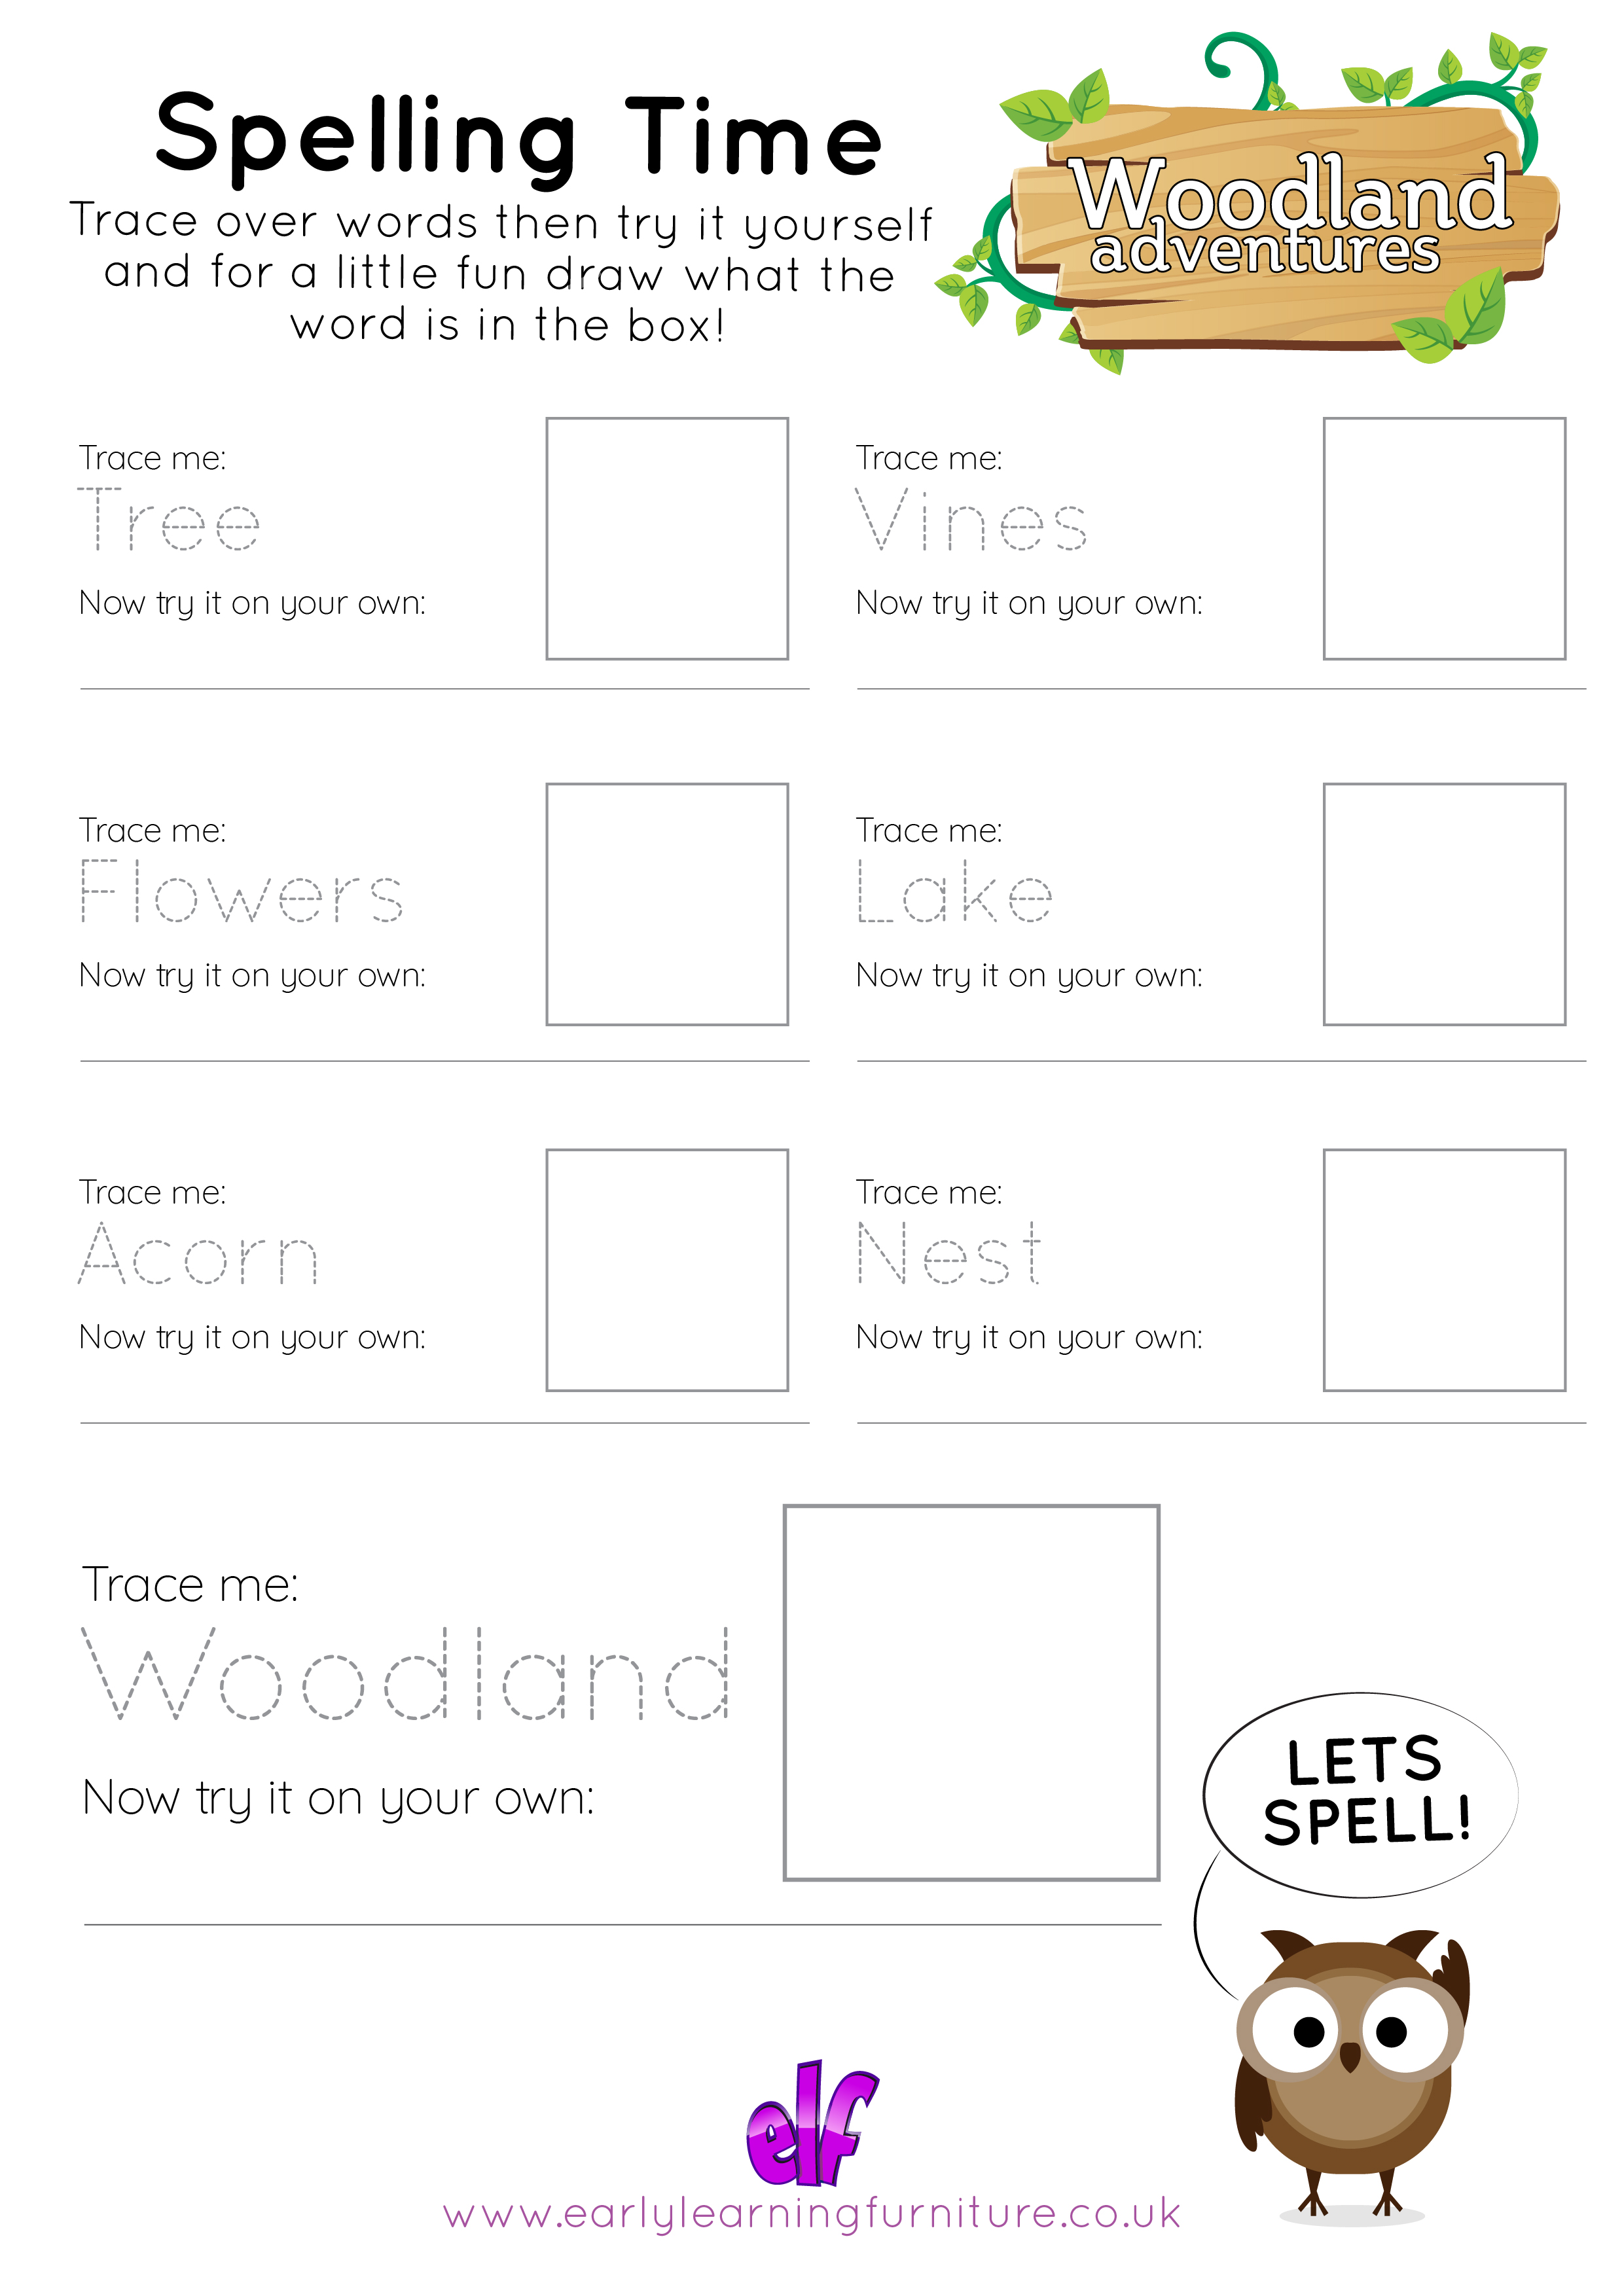 Free Teaching Resources Woodlands- Spelling 1